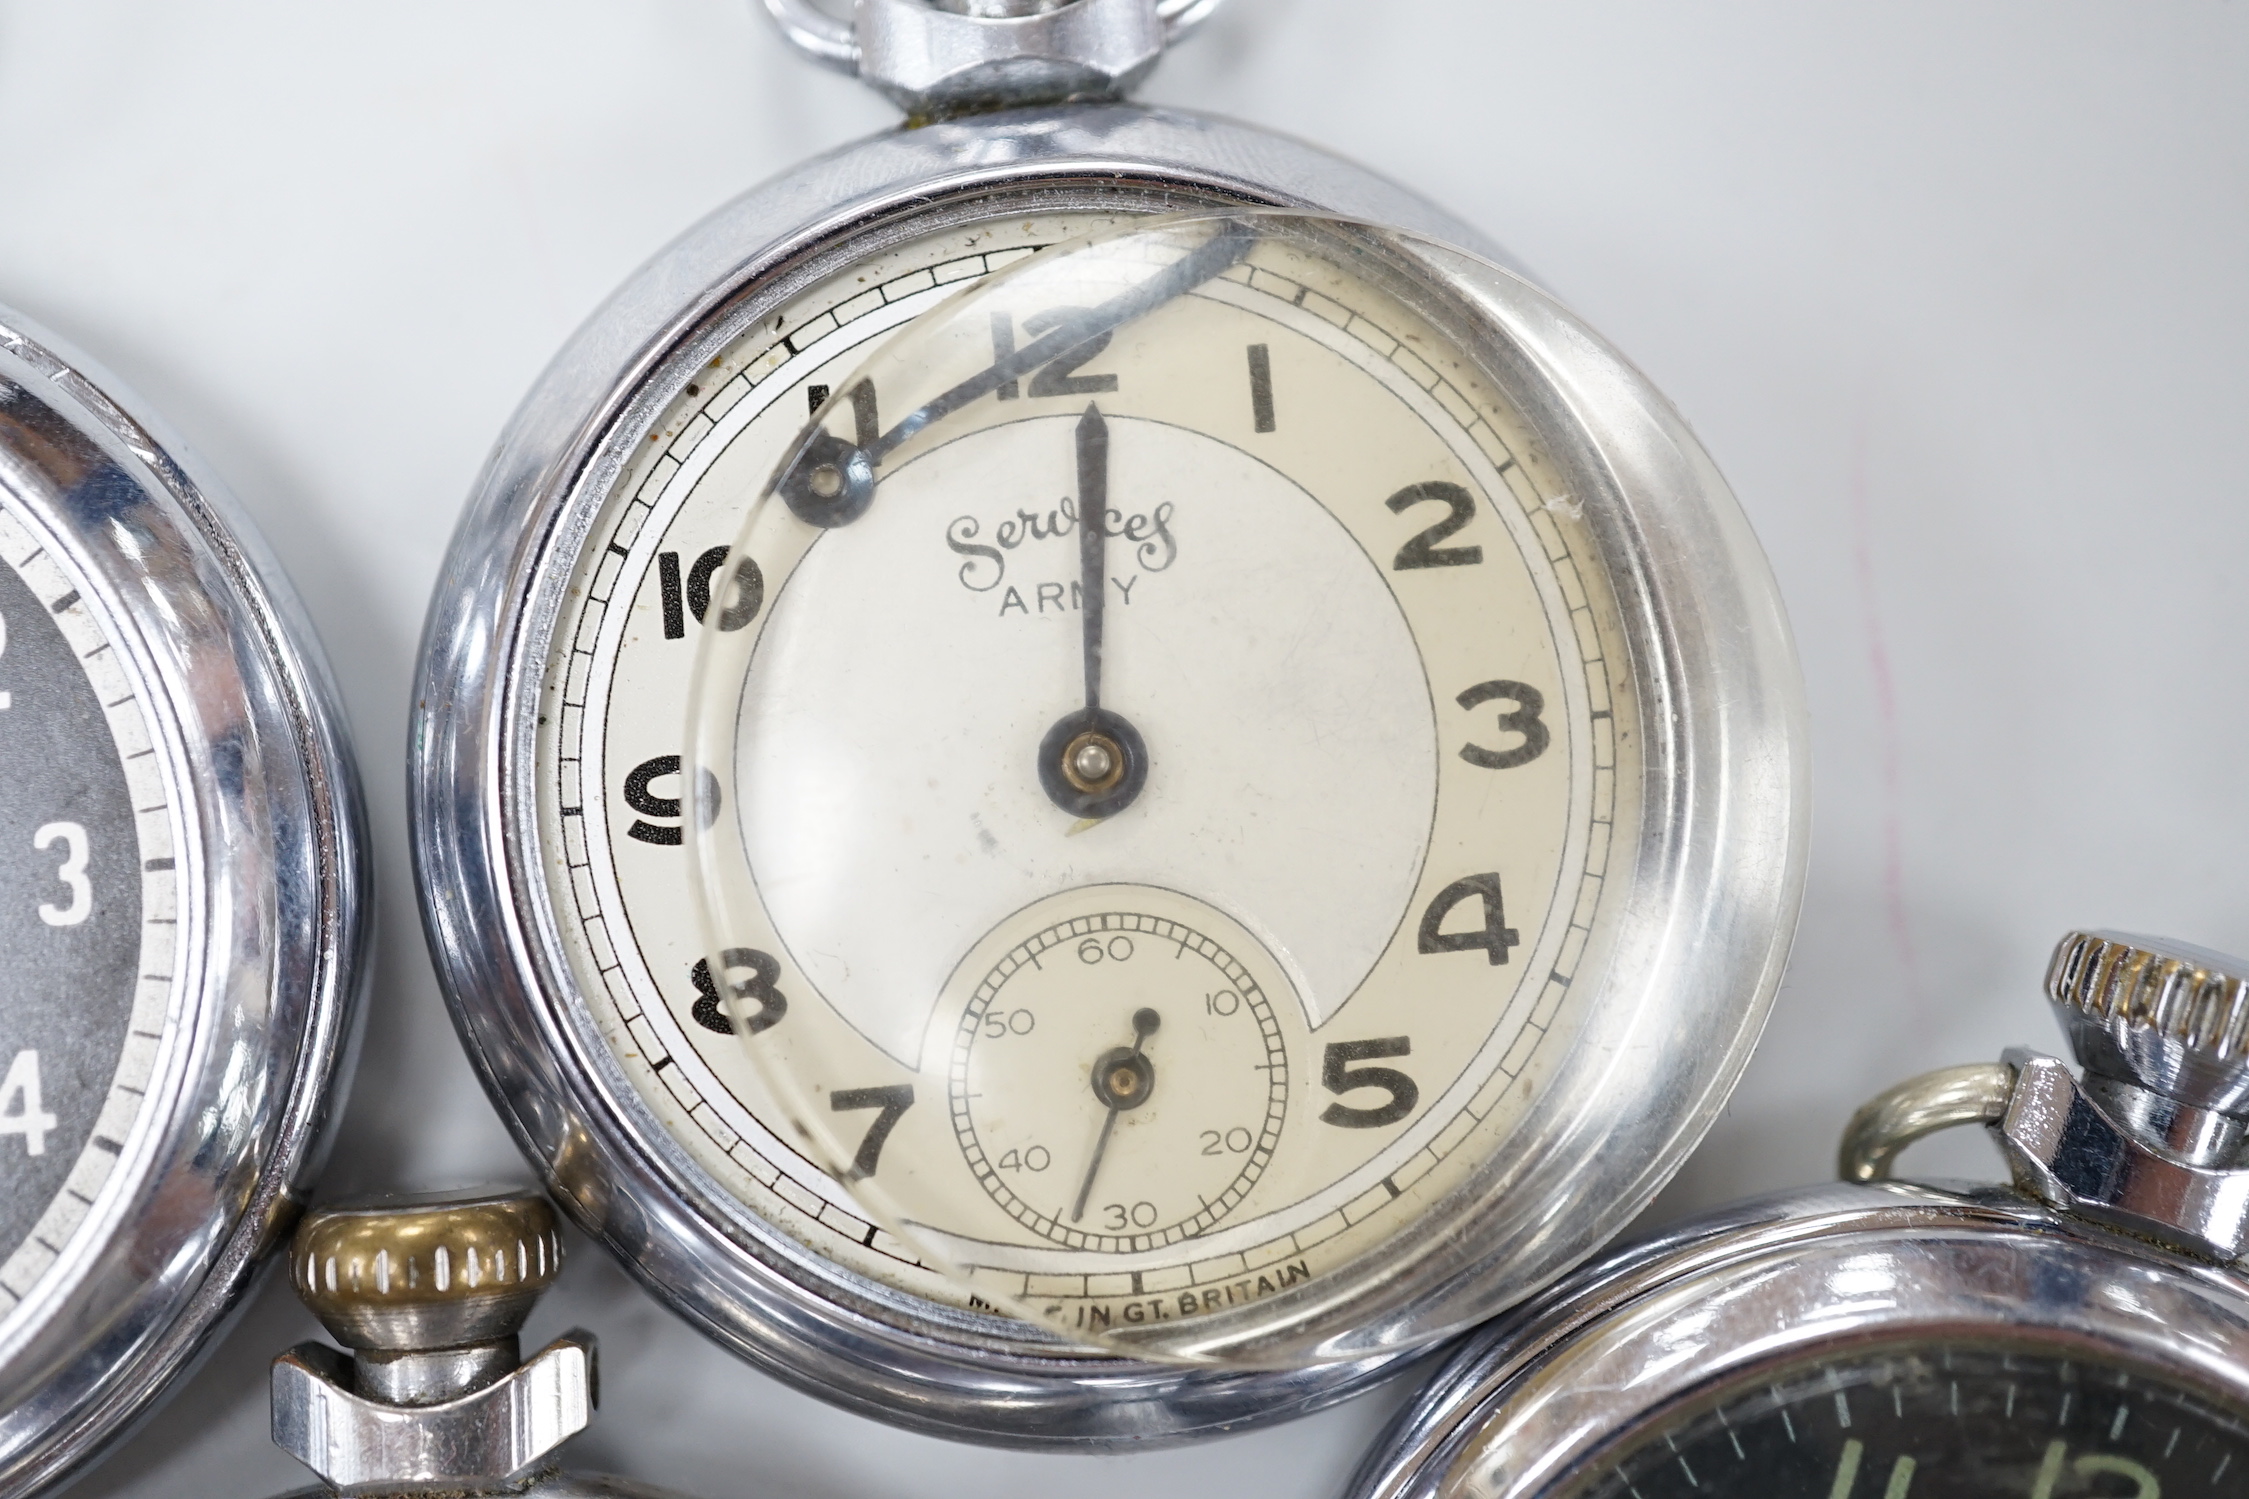 Ten assorted base metal pocket watches including Ingersoll, Services Excel and Smiths.